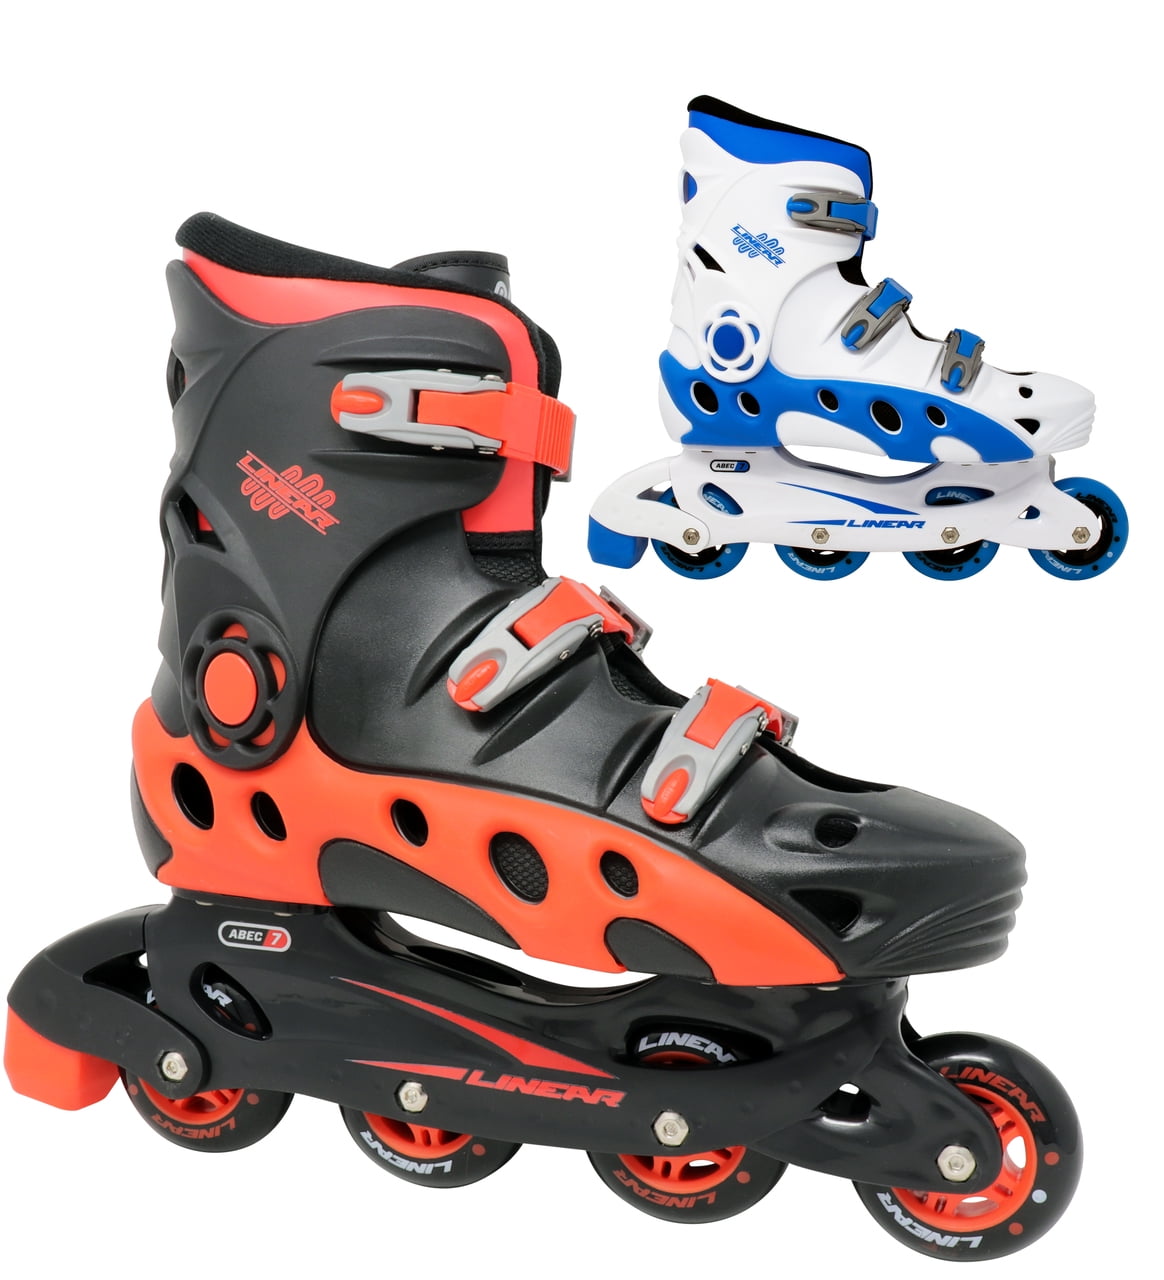 New Lange  ice figure roller blades inline white $29.99 retail fast free shipper 